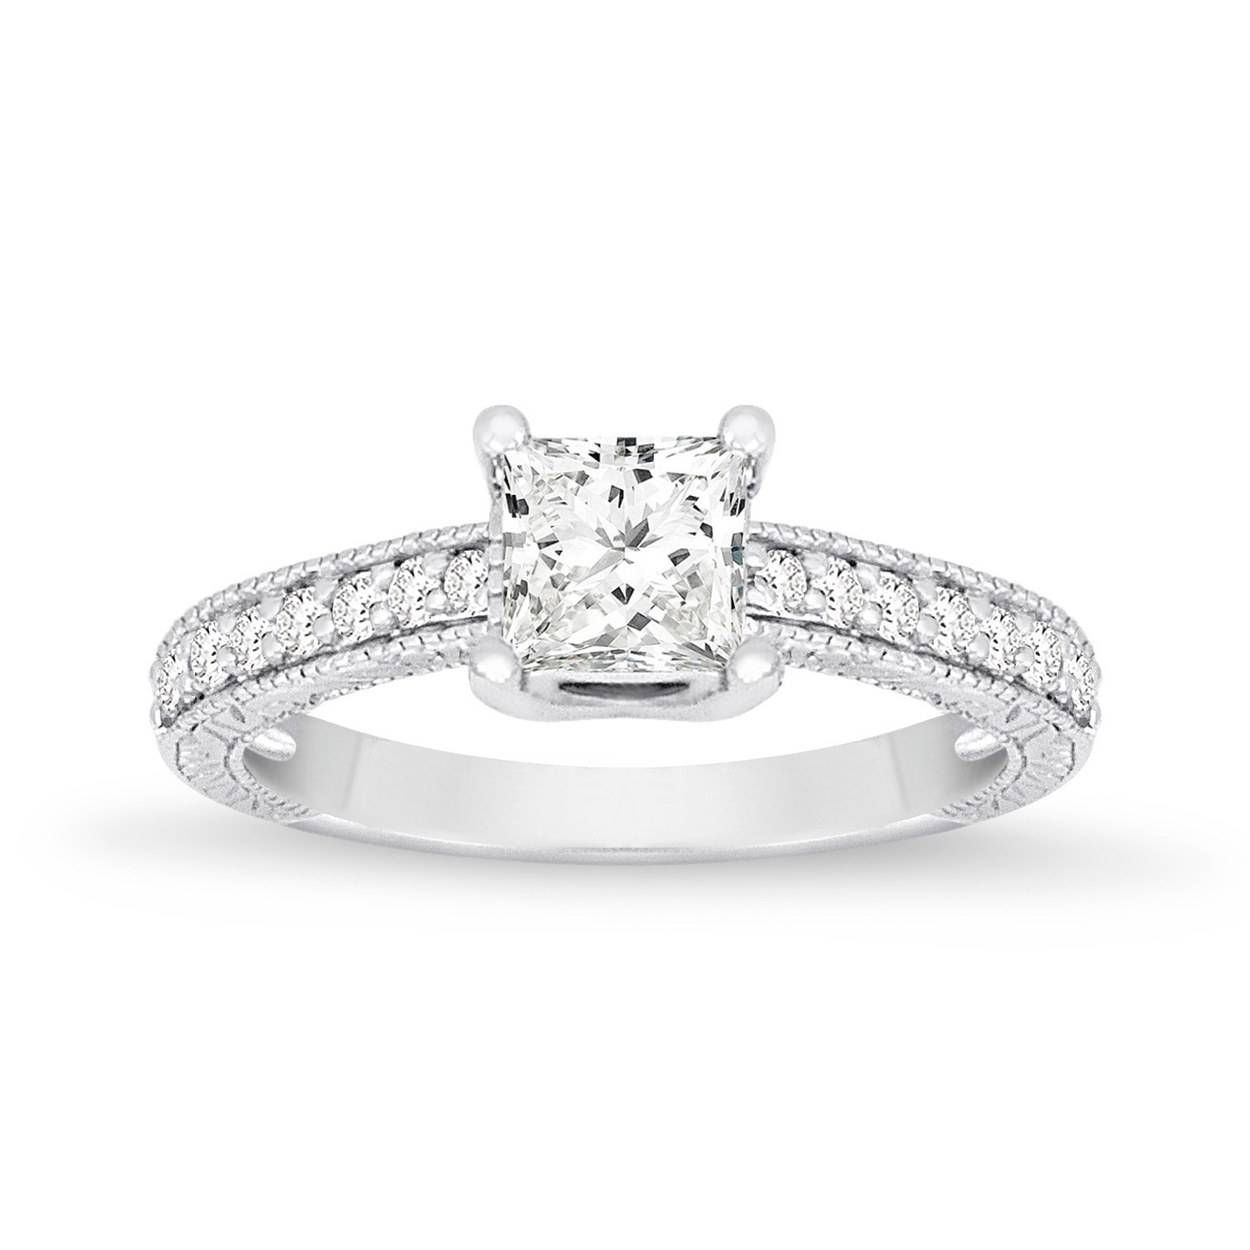 62 Diamond Engagement Rings Under $5,000 | Glamour Intended For Princess Cut Diamond Wedding Rings (View 8 of 15)